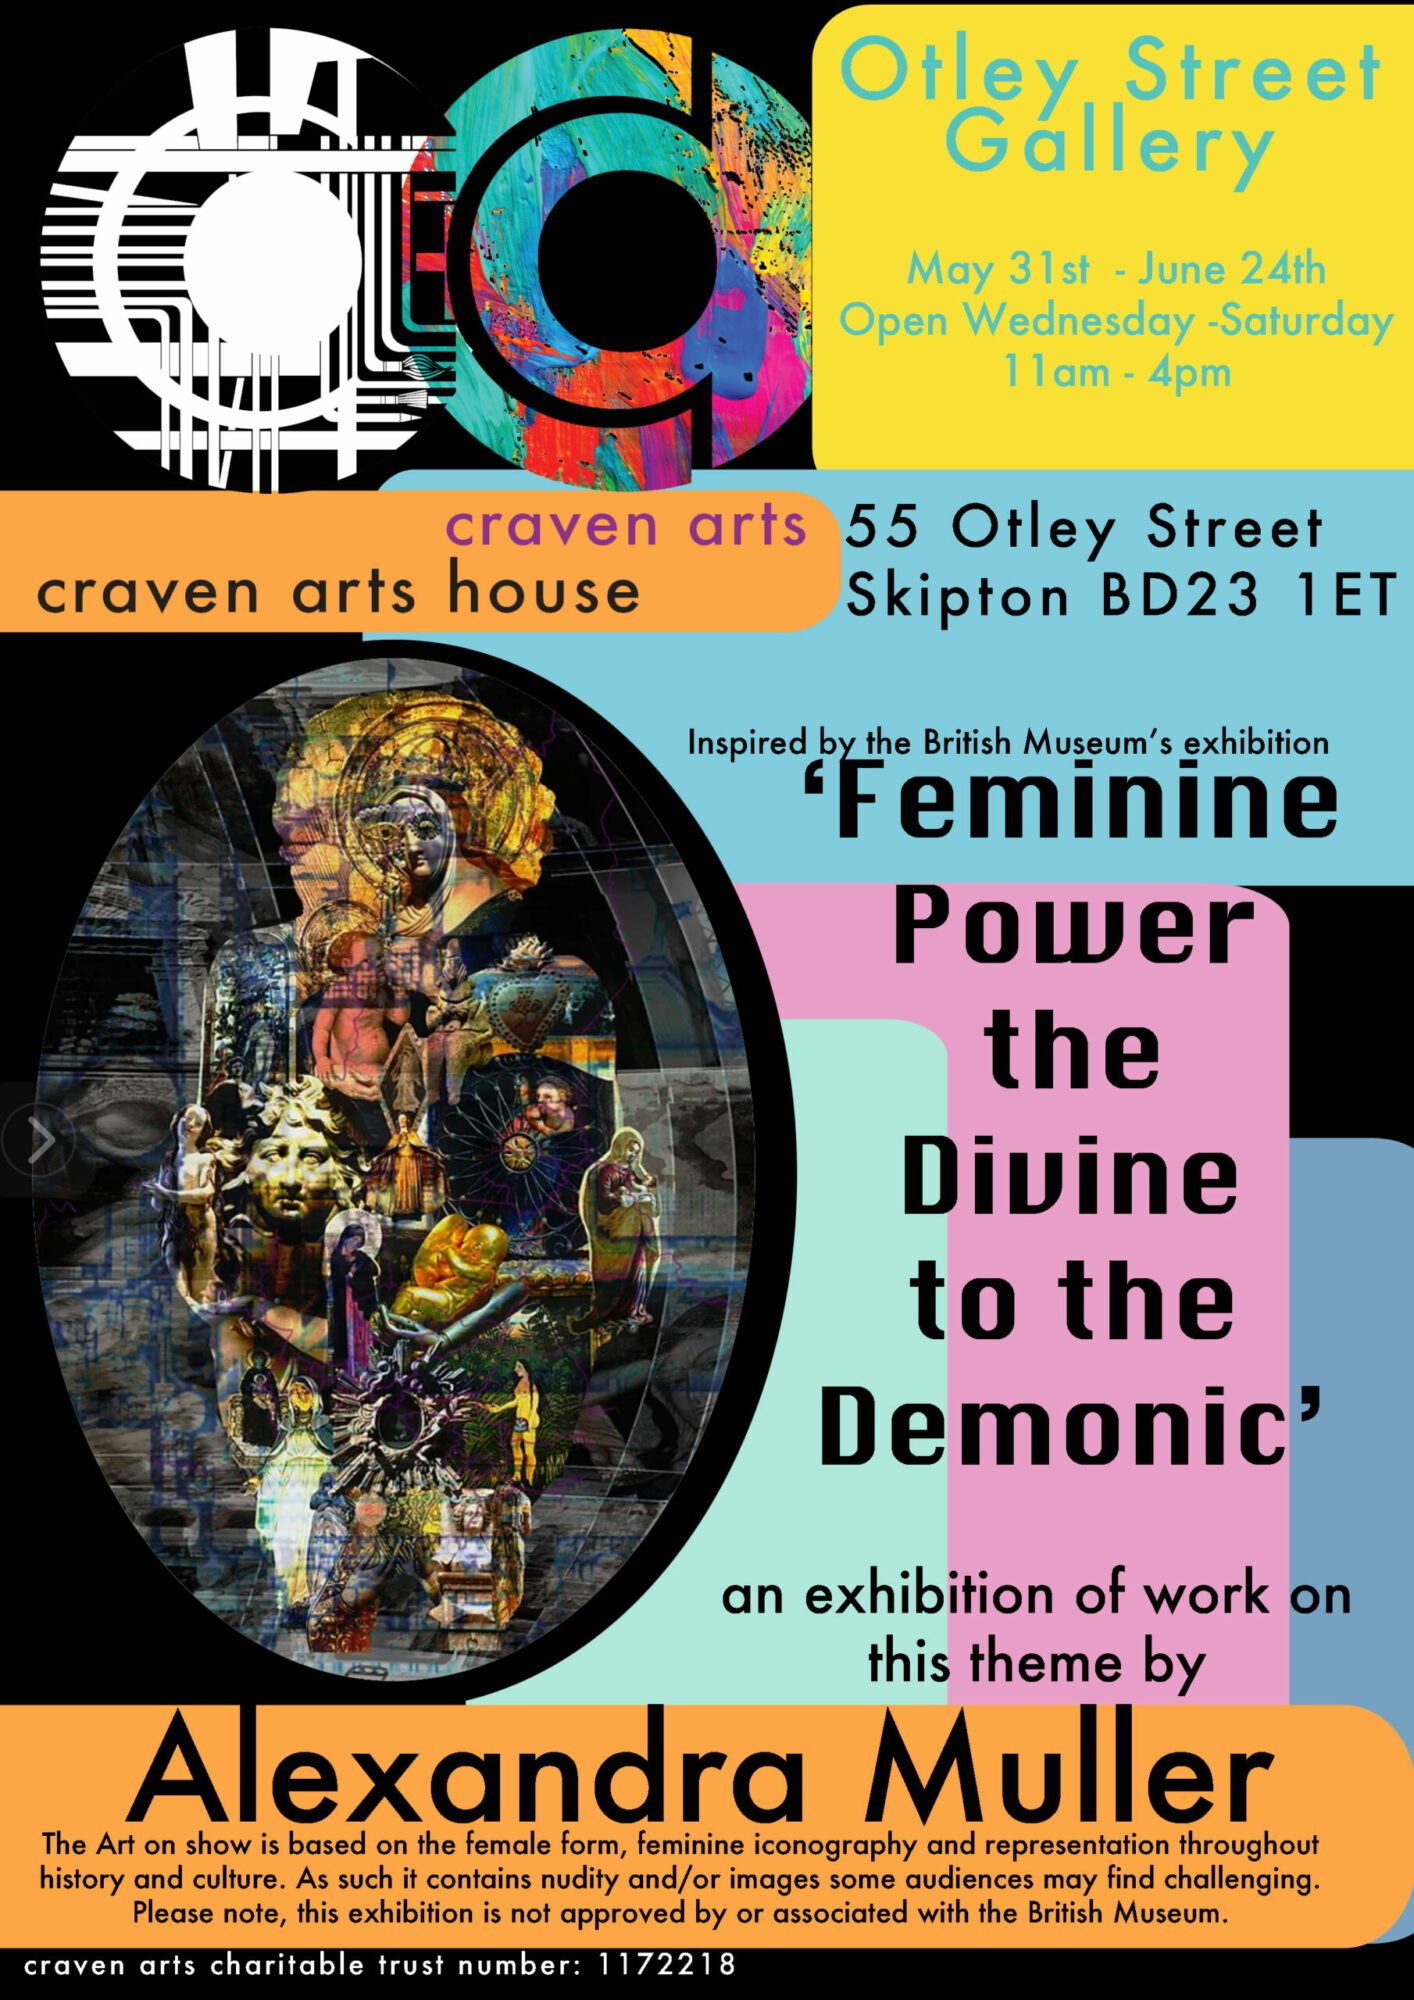 Image name Alexandra Muller poster 3 scaled the 3 image from the post Feminine power - Devine to the demonic in Yorkshire.com.